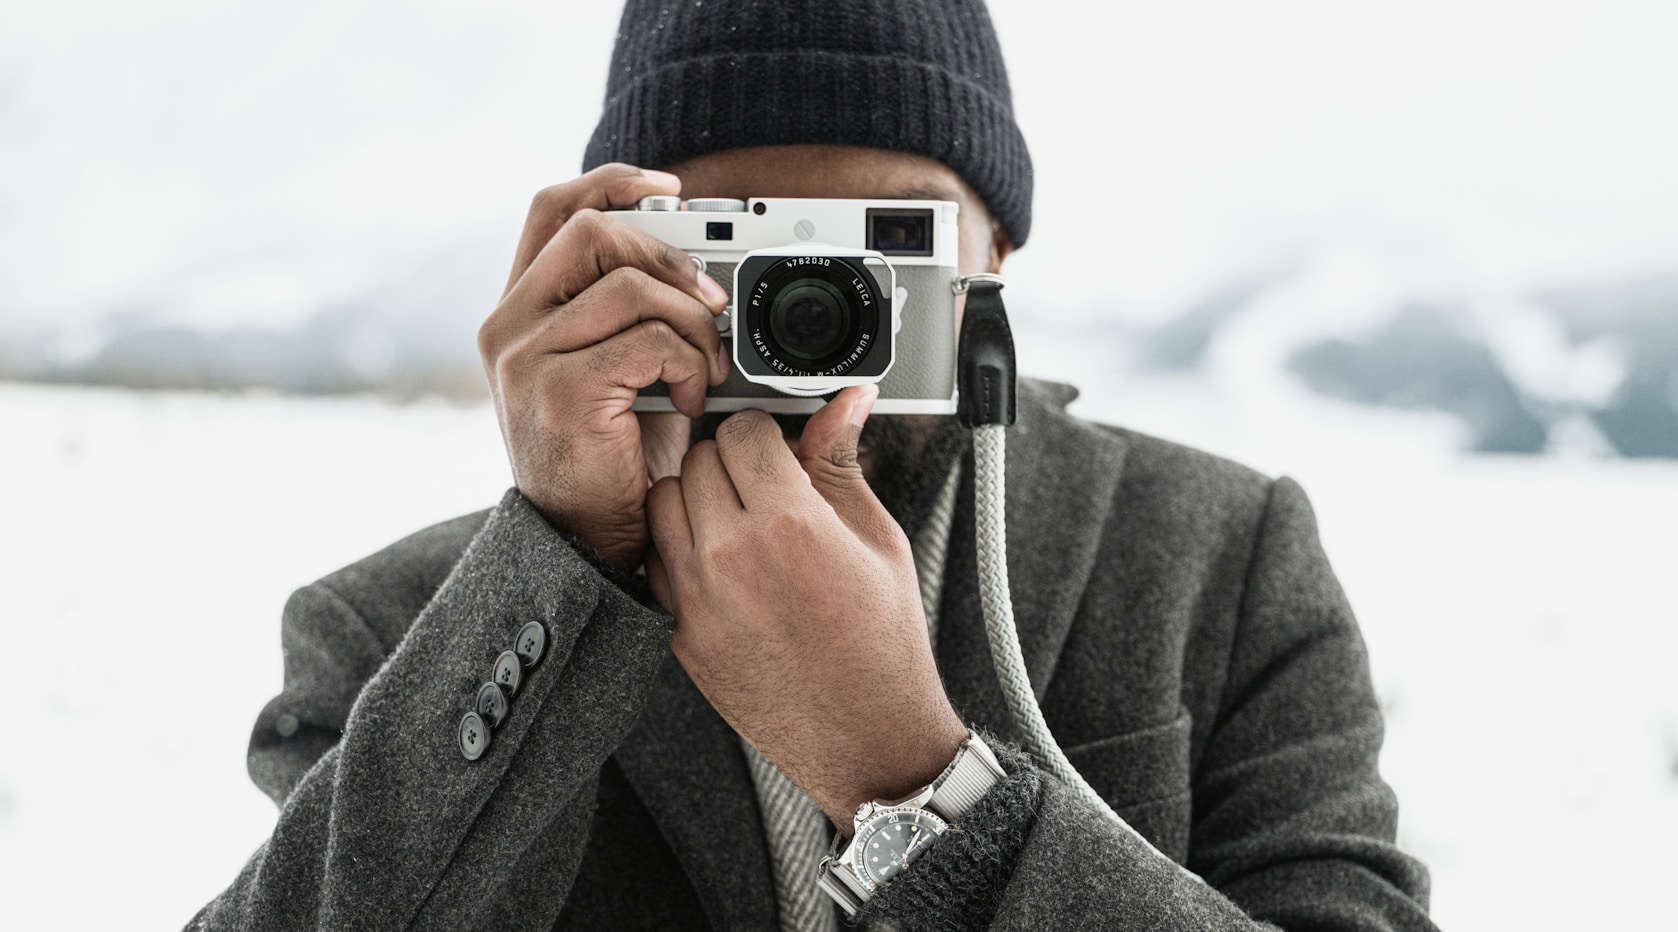 Meet Leica's newest limited-edition camera, the 'White' M10-P